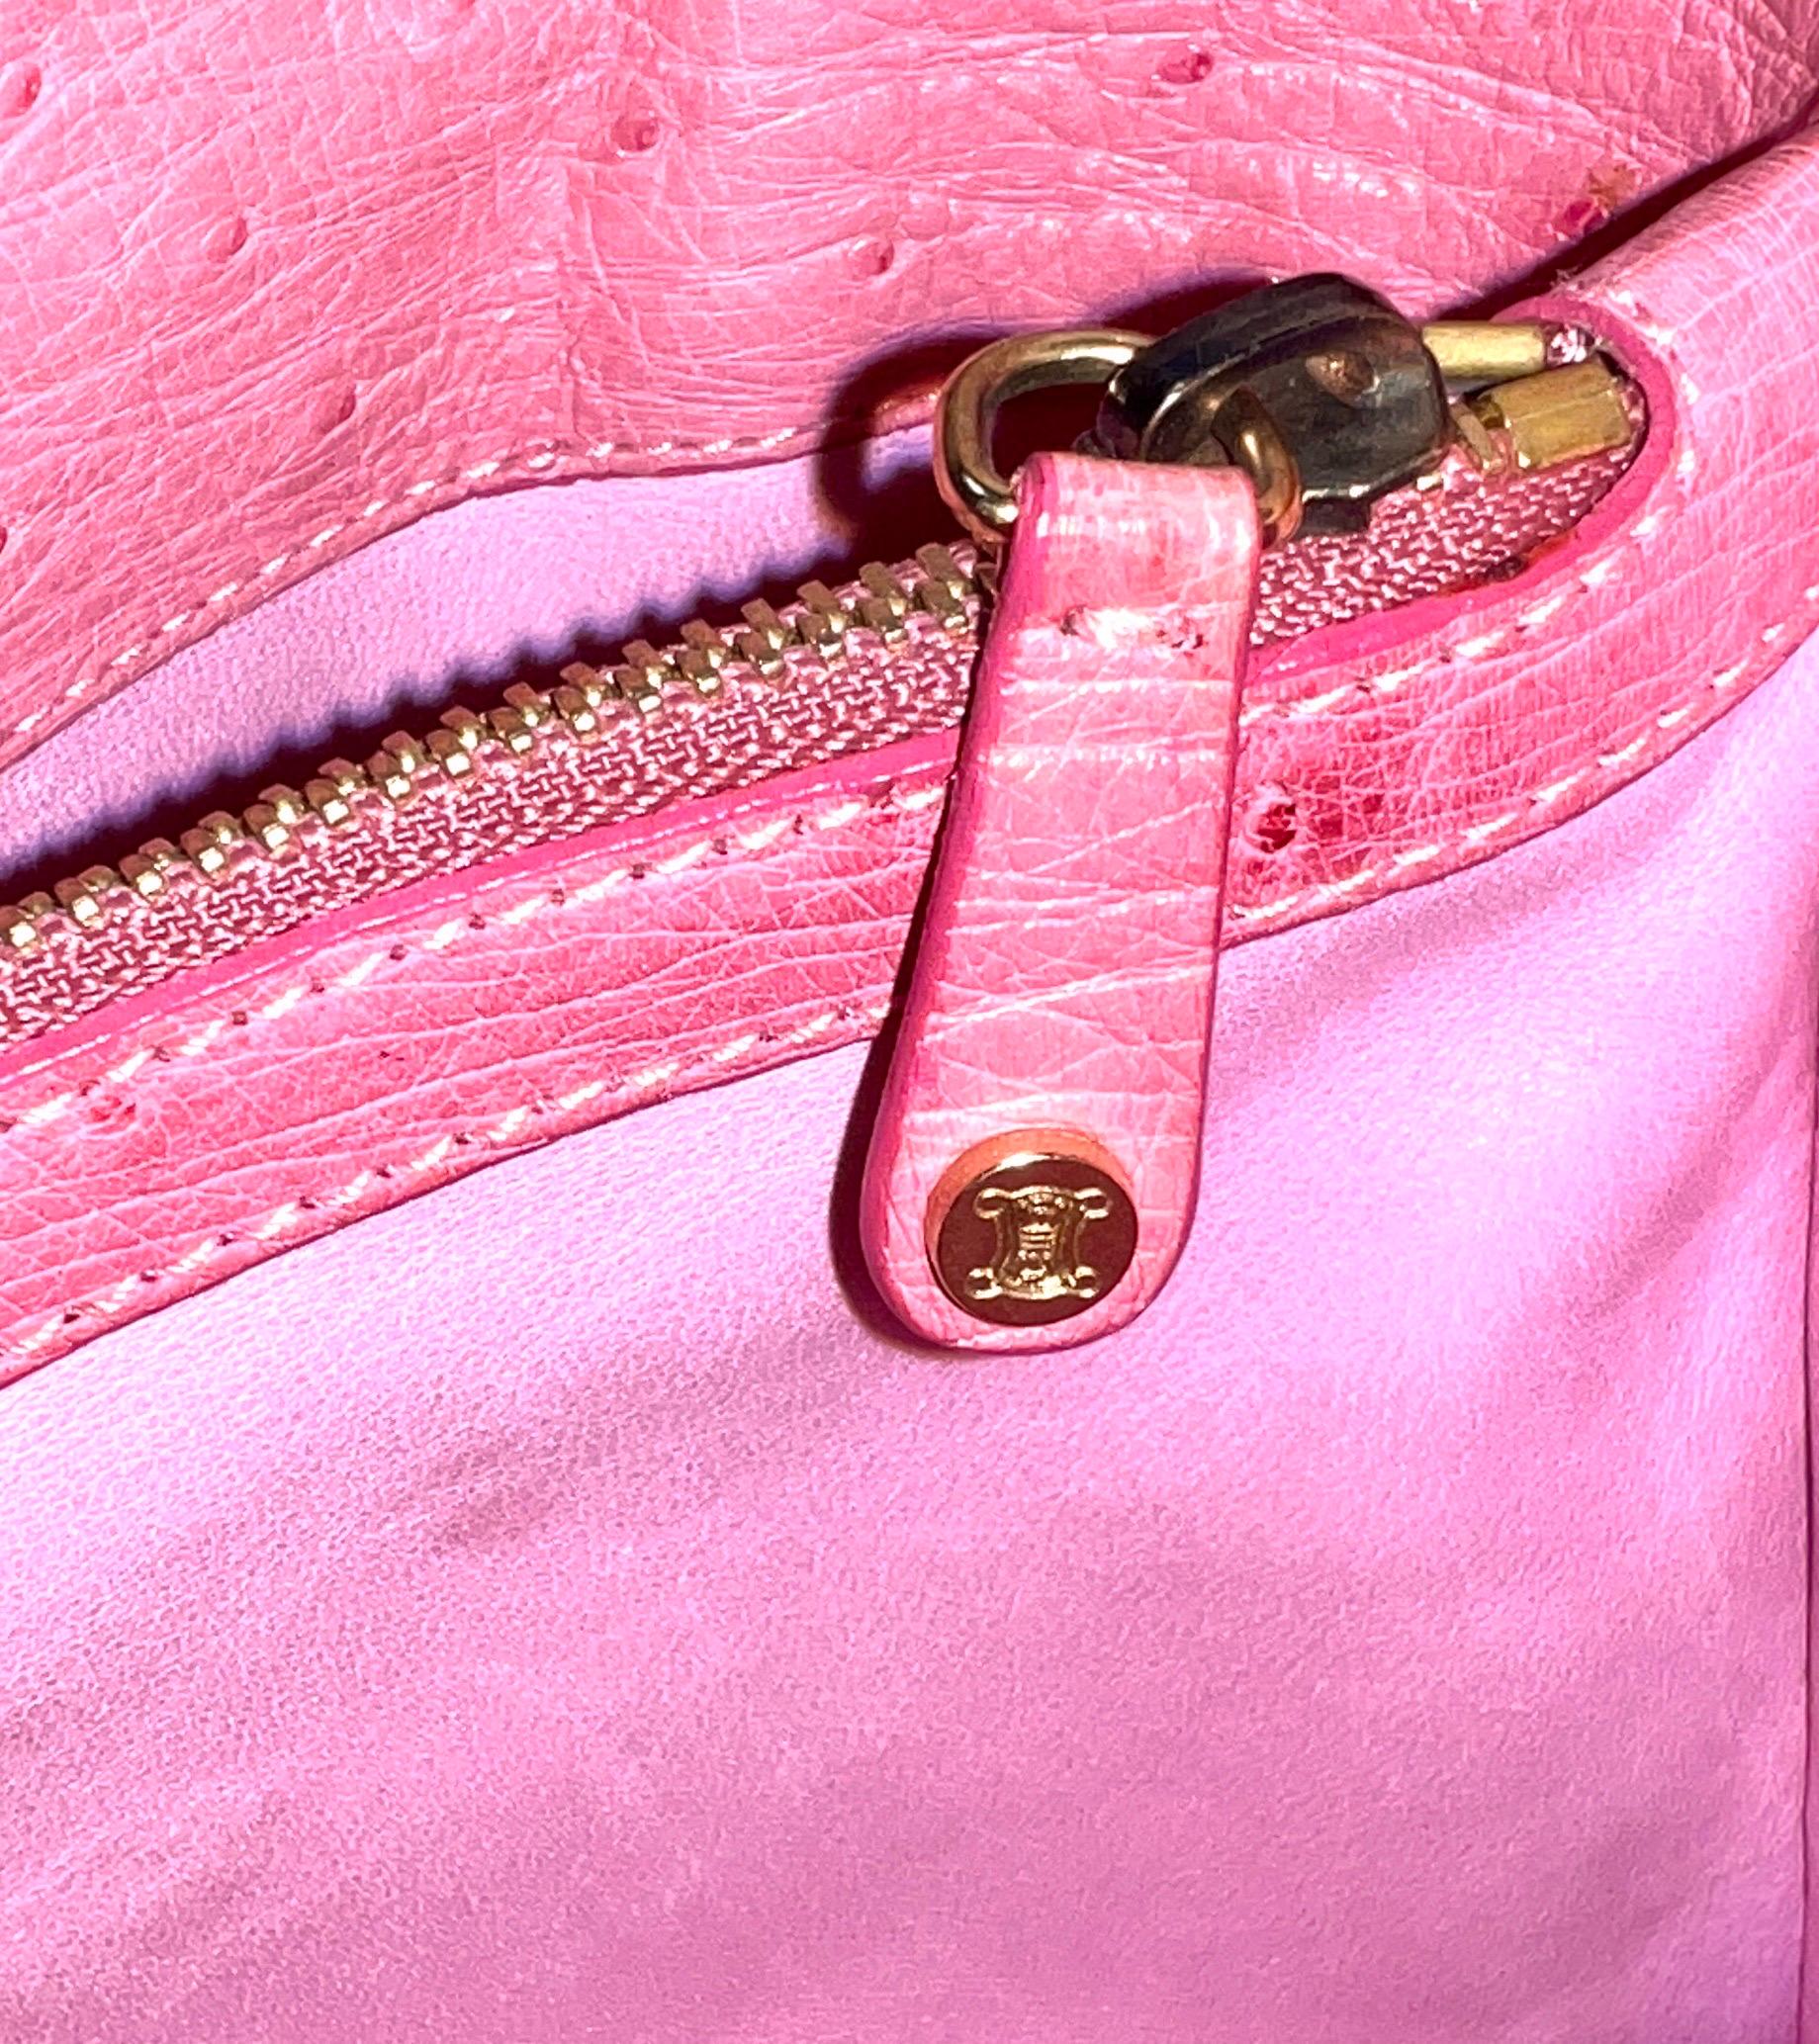 CELINE Rare Exotic Pink „Barbie“ Ostrich Skin Boogie Bag by Michael Kors 2000s For Sale 5